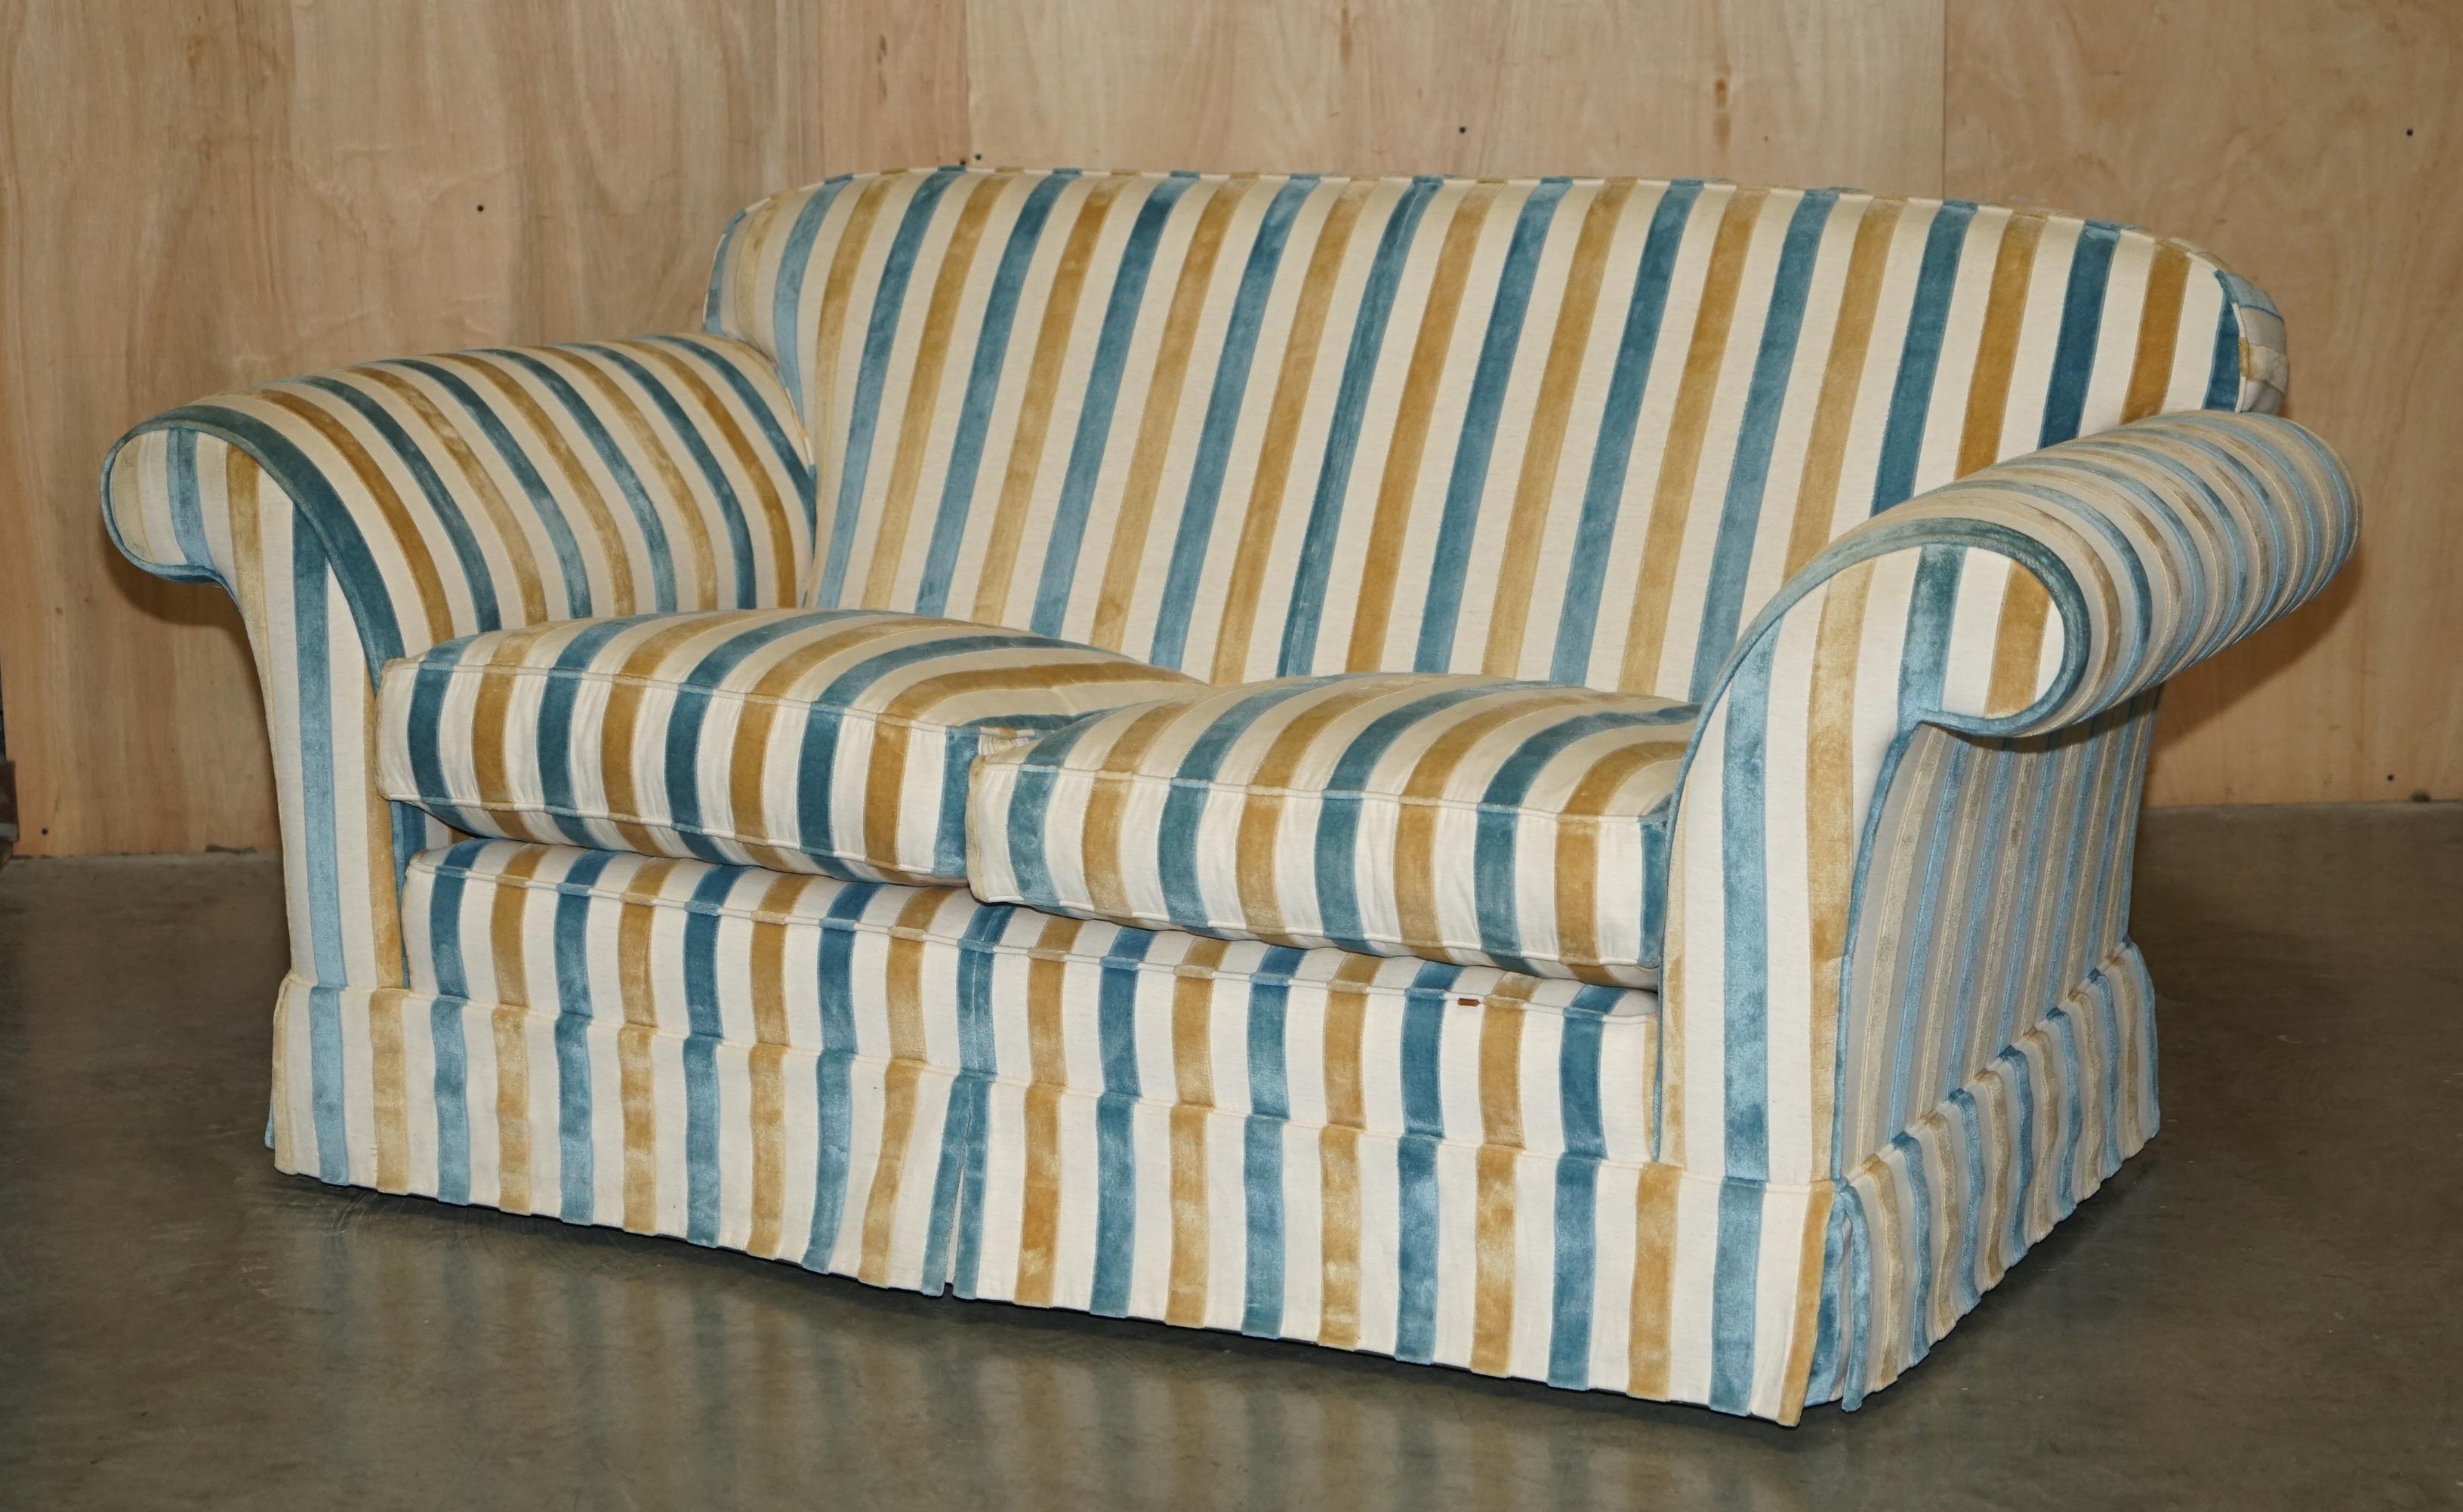 Country 1 DE 2 STUNNING MULBERRY HOME DESiGNER CONTEMPORARY STRIPED TWO SEATER SOFAS en vente